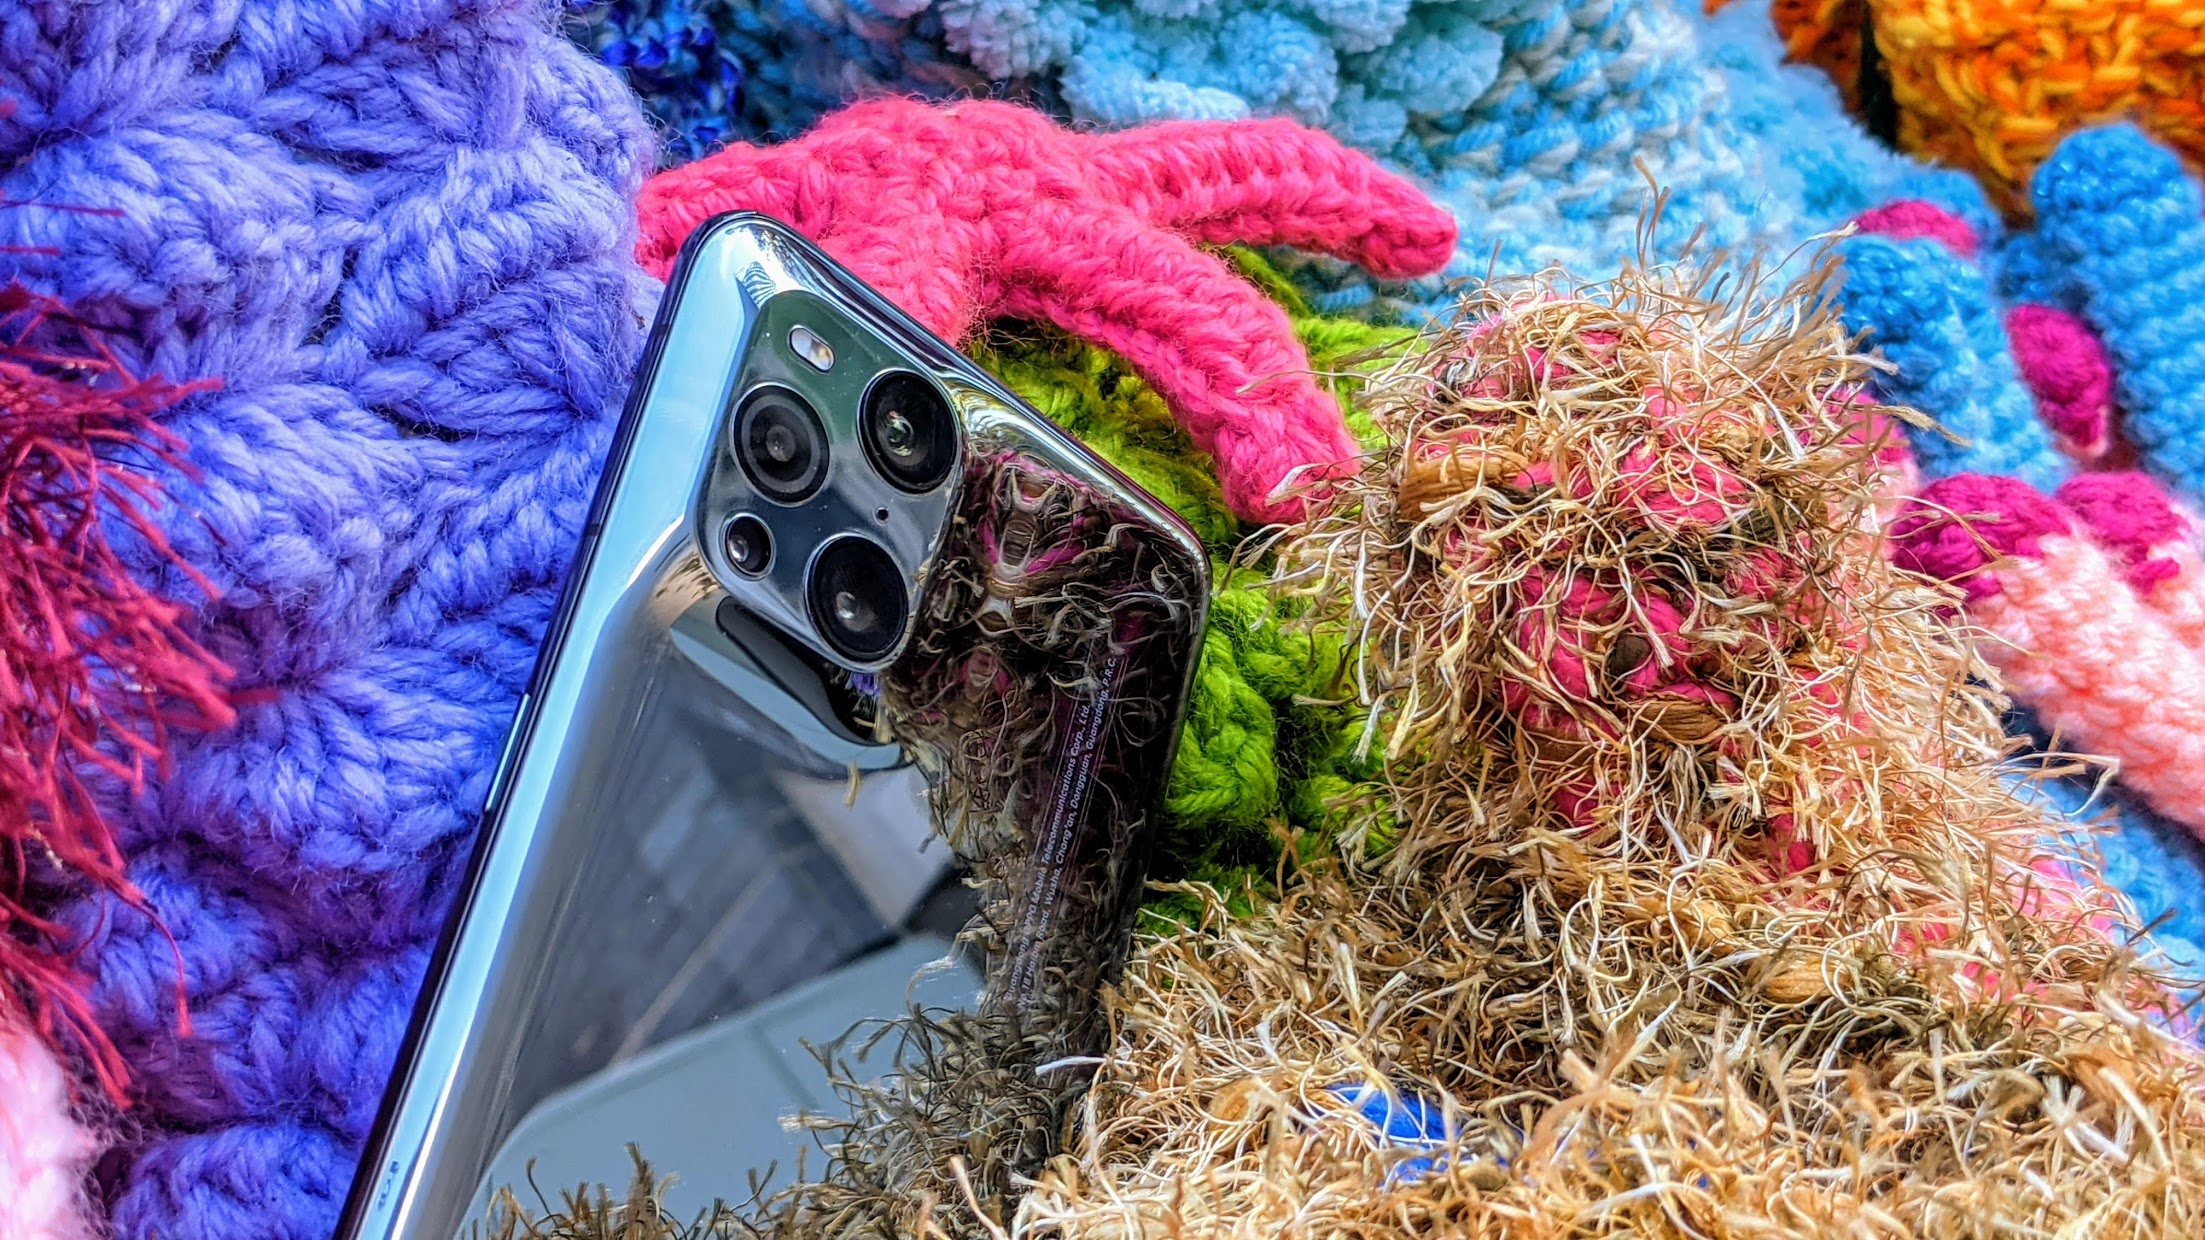 Oppo Find X3 Pro review: The Galaxy S21 Ultra has a serious rival